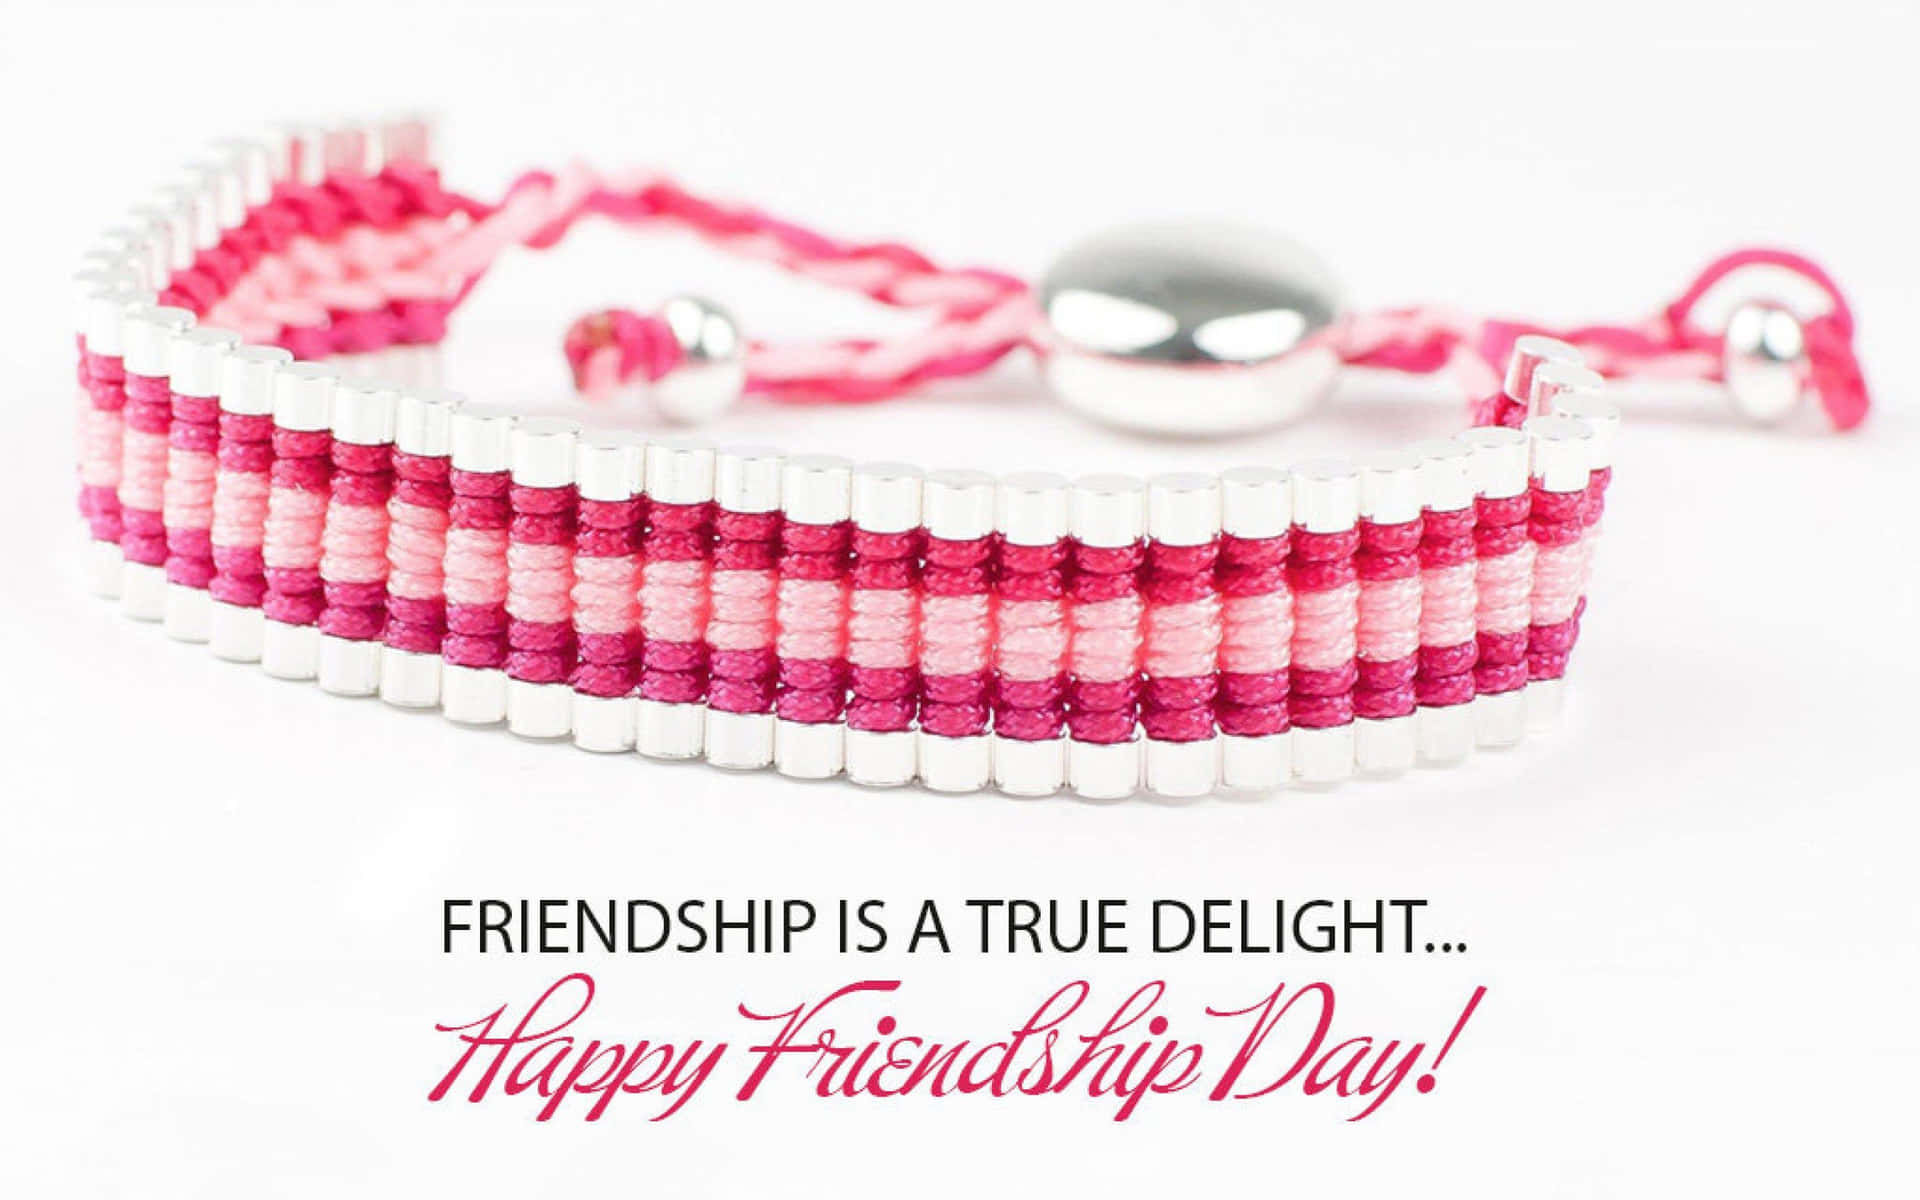 Celebrate your friends this Friendship Day!